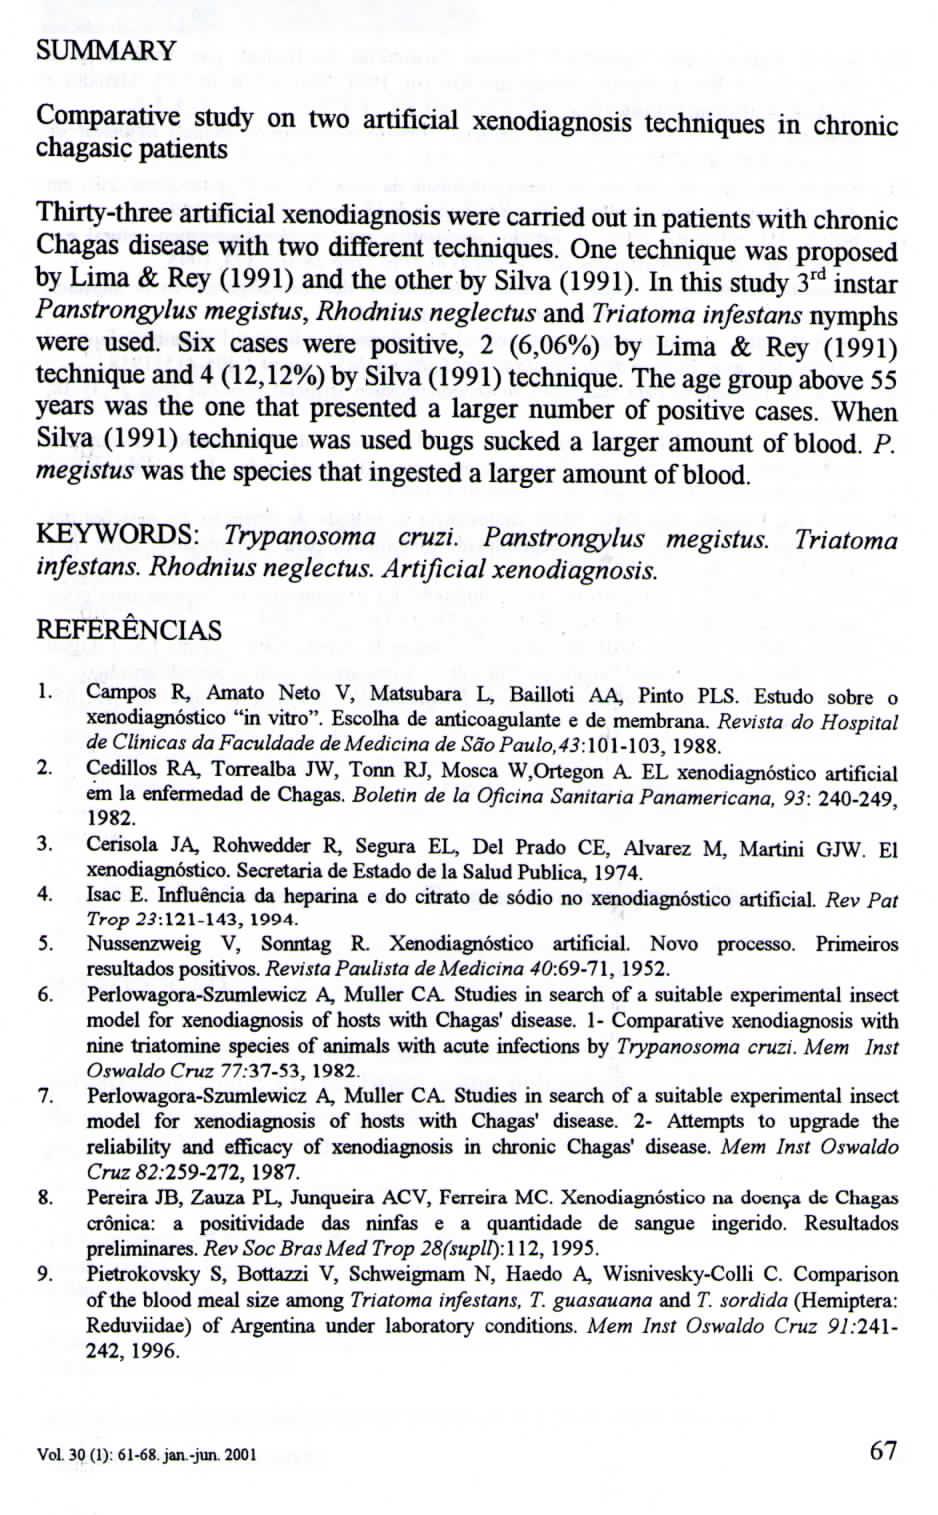 SUARY Comparativo study on two artificial xenodiagnosis techniques in chronic chagasic patients Thirty-three artificial xenodiagnosis were carried out in patients with chronic Chagas disease with two